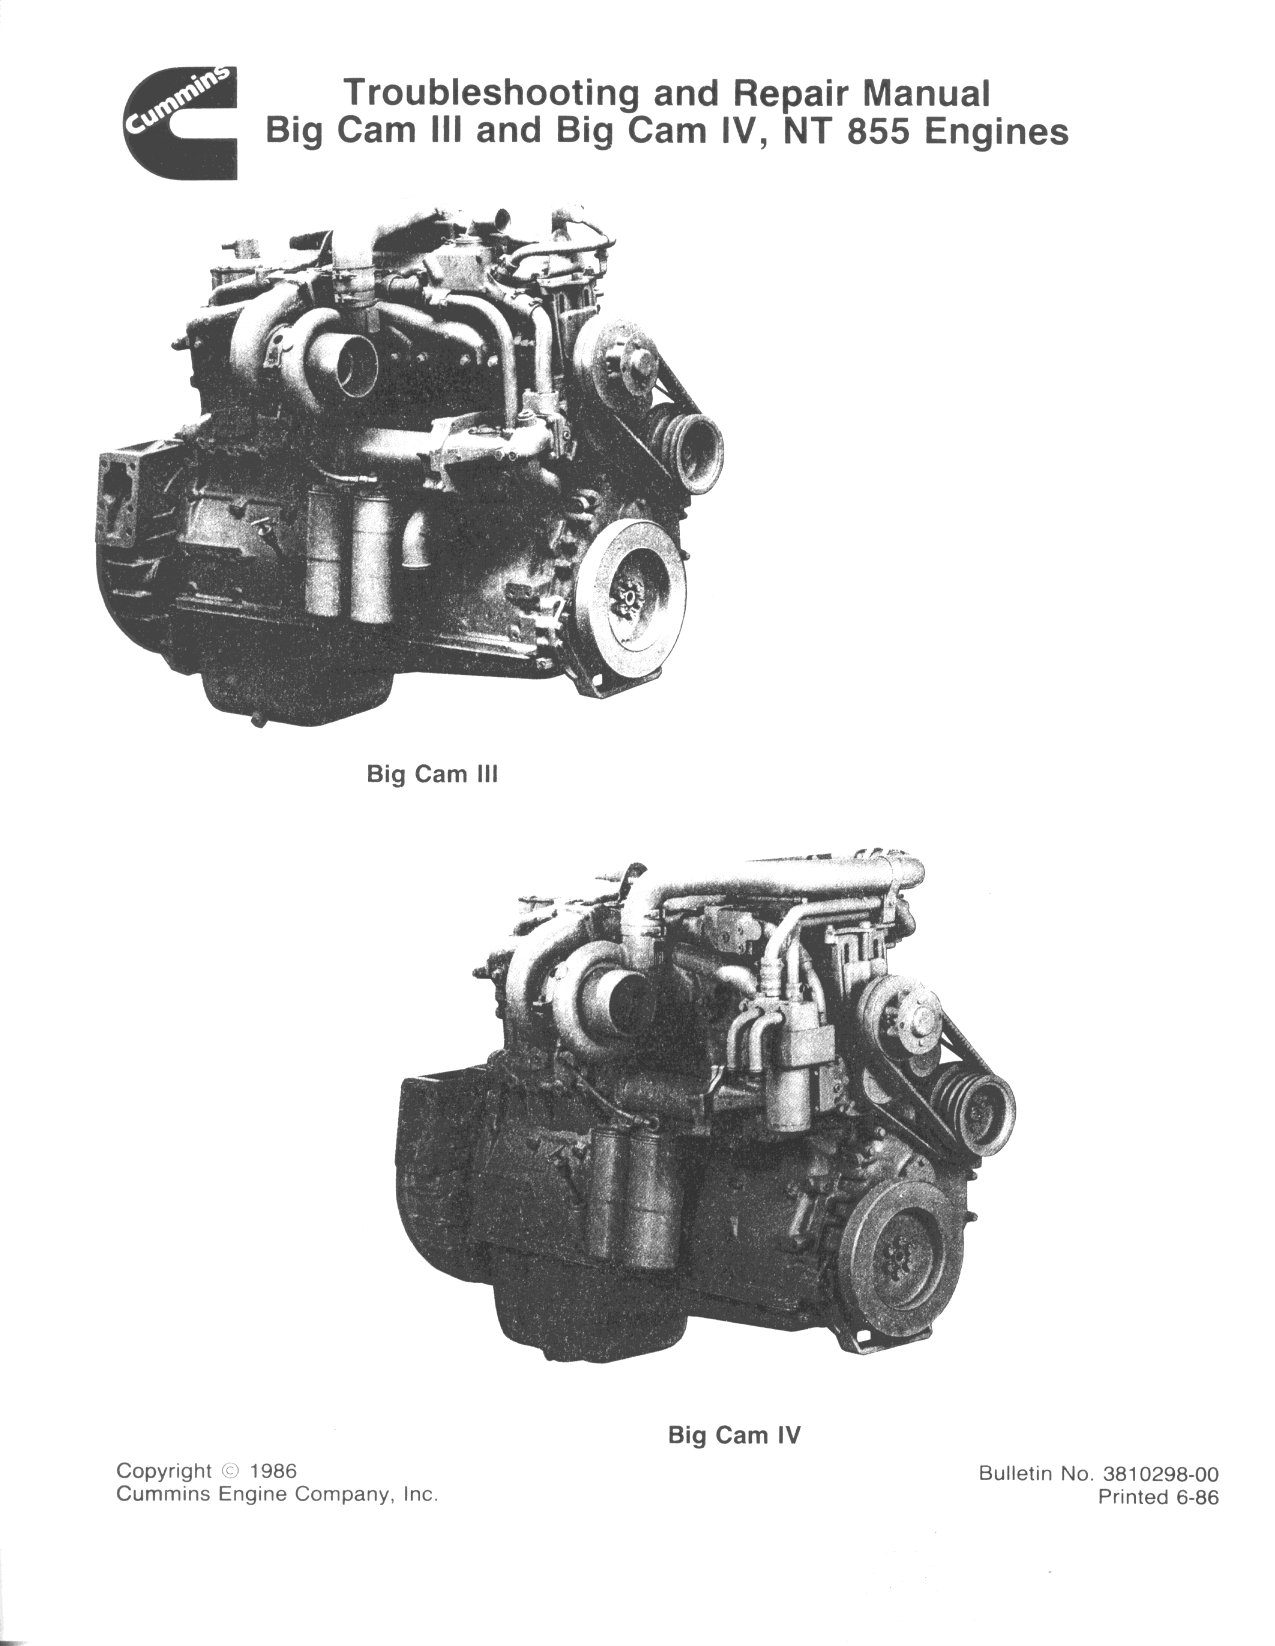 Cummins NT 855 engine Big Cam III & IV troubleshooting and repair manual Preview image 6